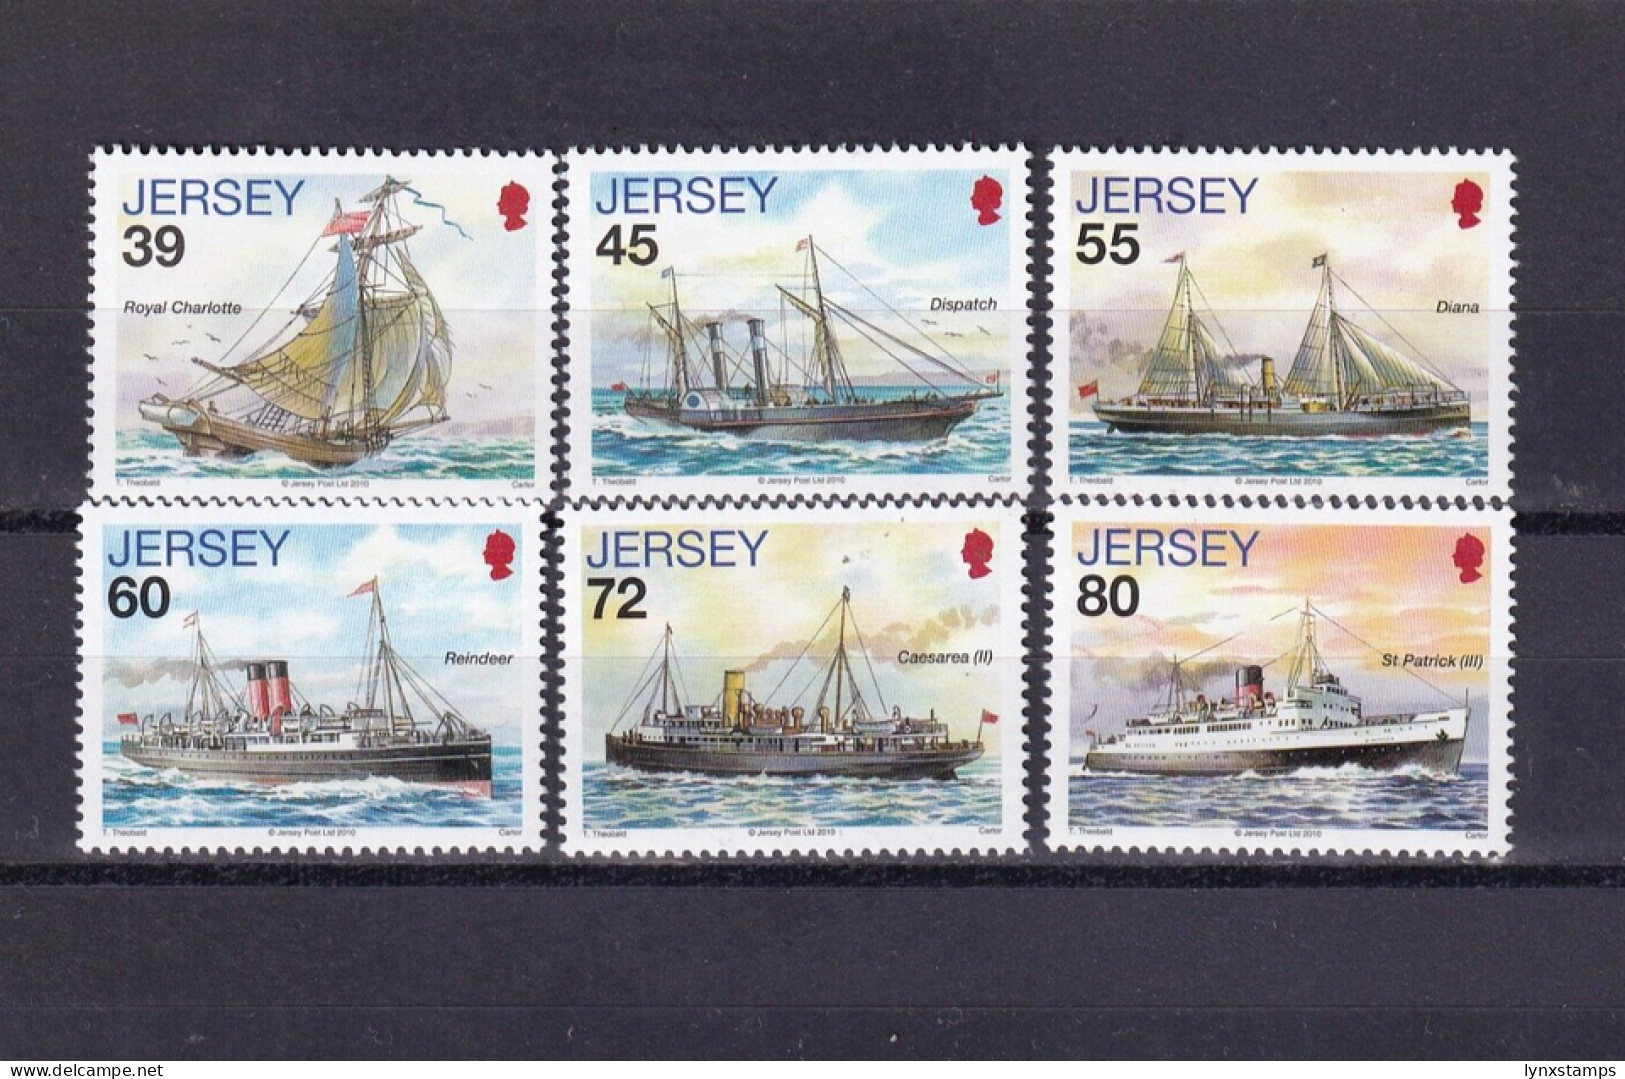 LI01 Jersey Great Britain 2010 Mail Ships - Local Issues